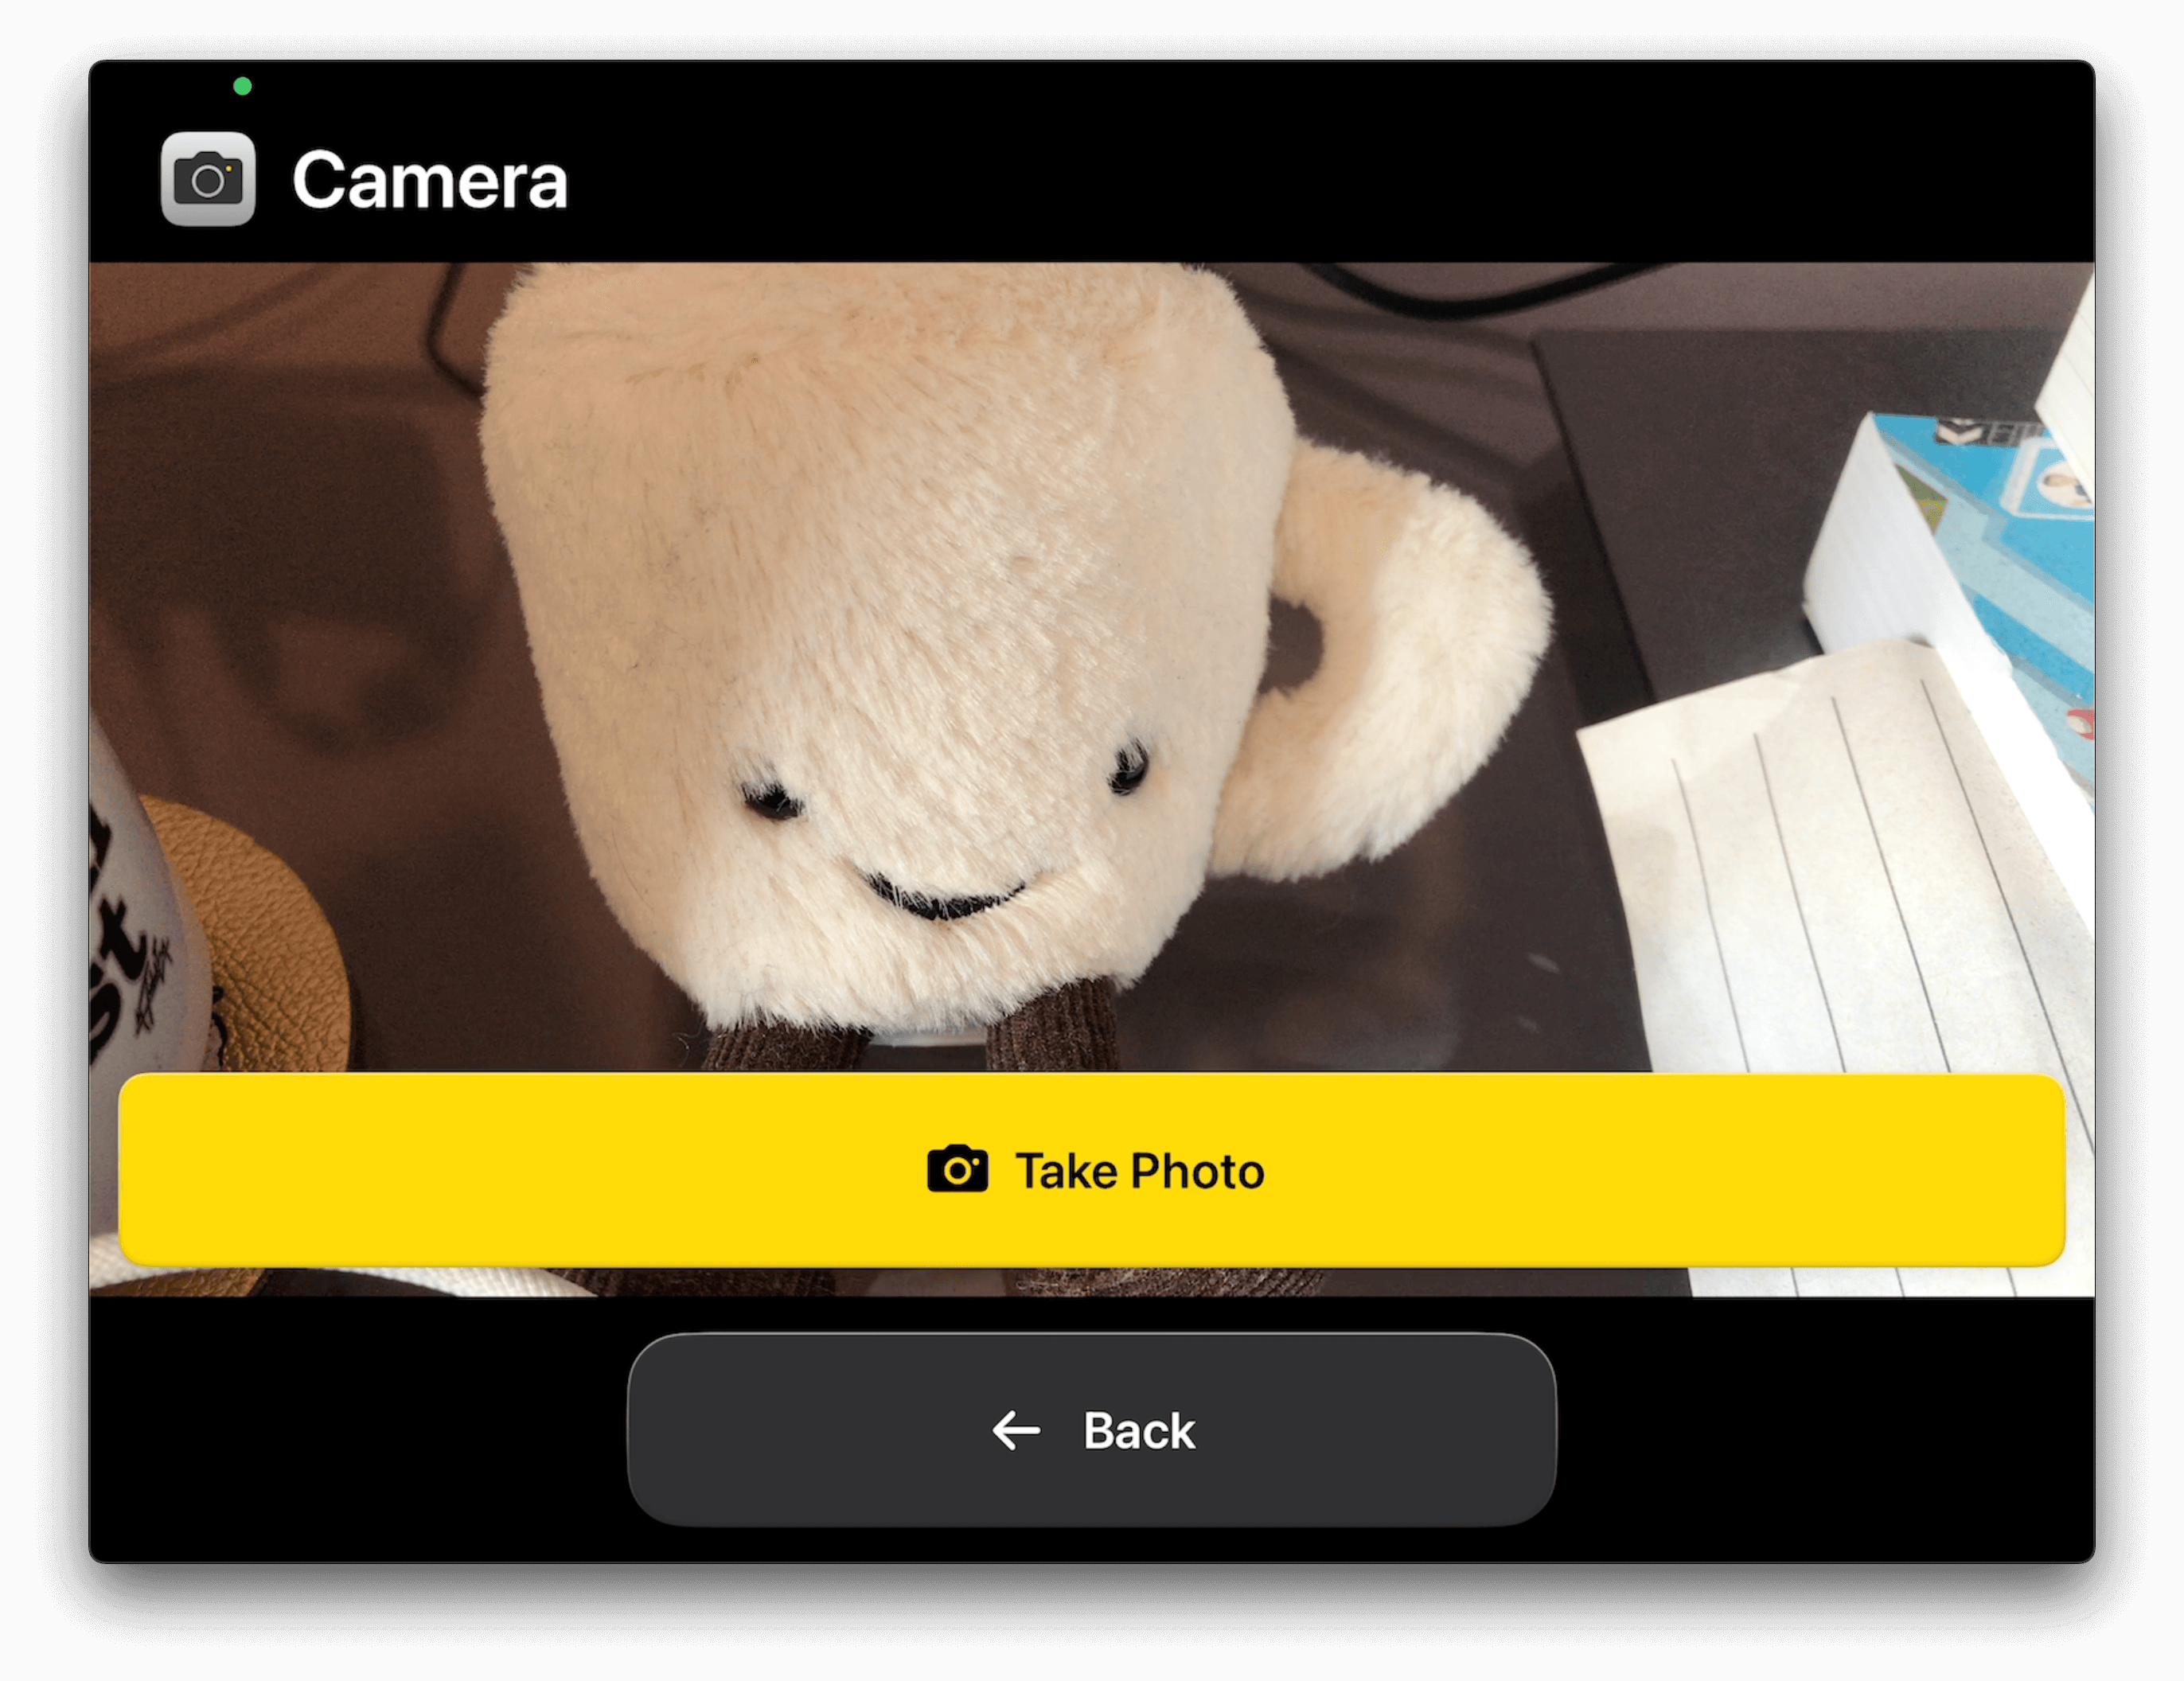 An iPad in landscape mode showing the Camera app. A large view finder has a floating "Take Photo" button at the top in bright yellow.